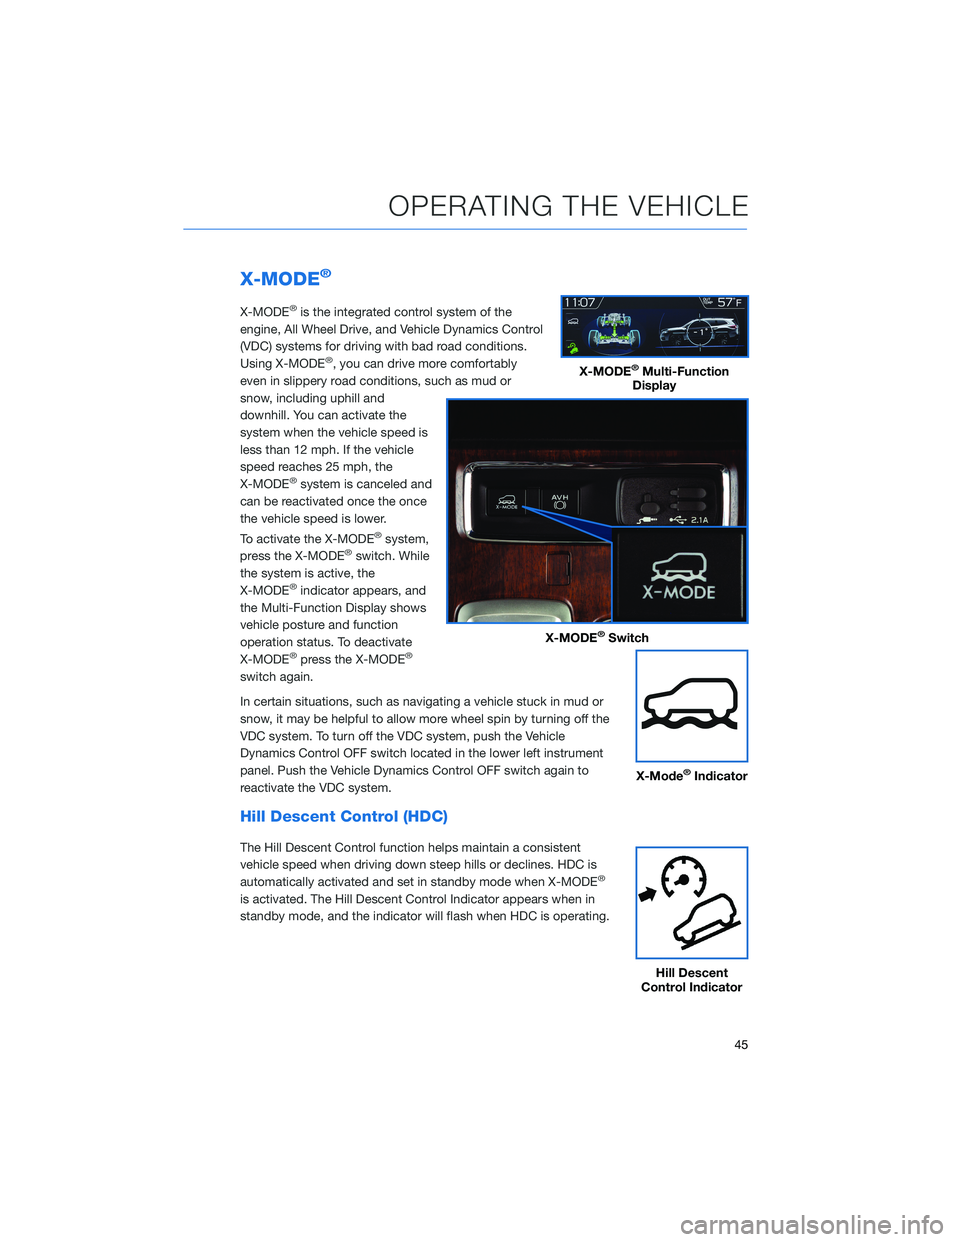 SUBARU ASCENT 2022  Getting Started Guide X-MODE®
X-MODE®is the integrated control system of the
engine, All Wheel Drive, and Vehicle Dynamics Control
(VDC) systems for driving with bad road conditions.
Using X-MODE
®, you can drive more c